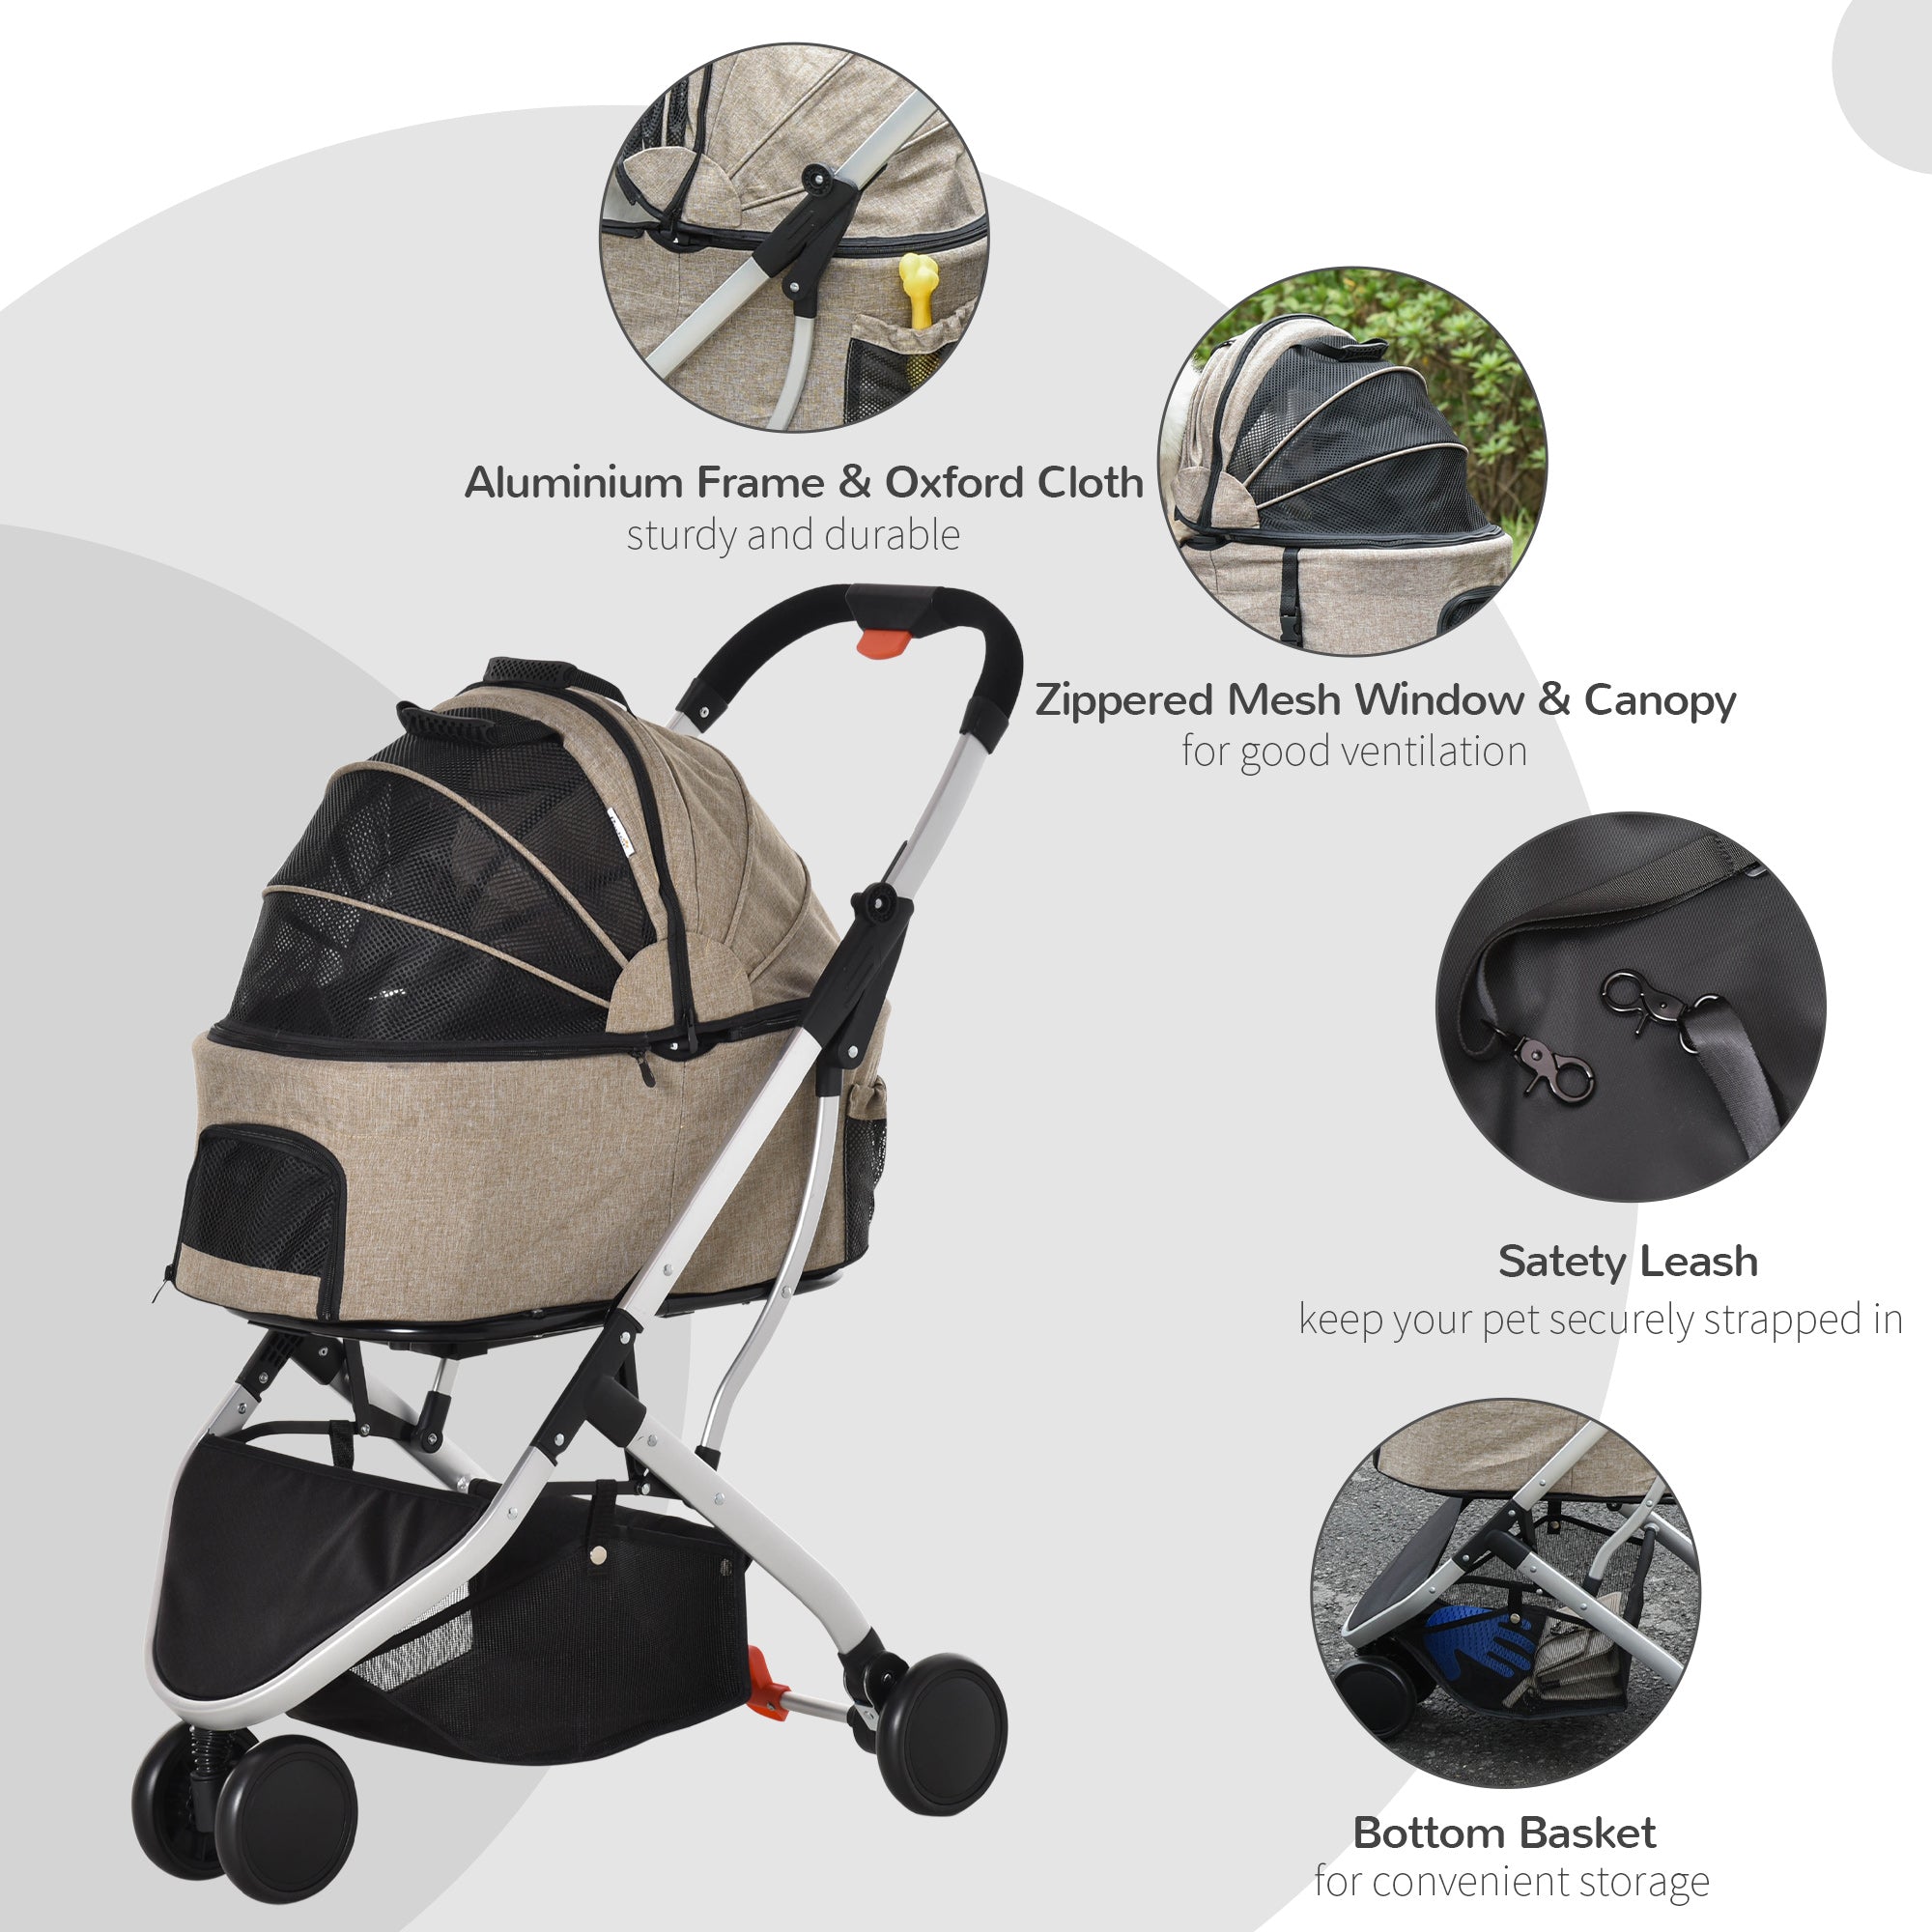 Detachable Pet Stroller 2-In-1 Foldable Dog Cat Travel Carriage Carrying Bag